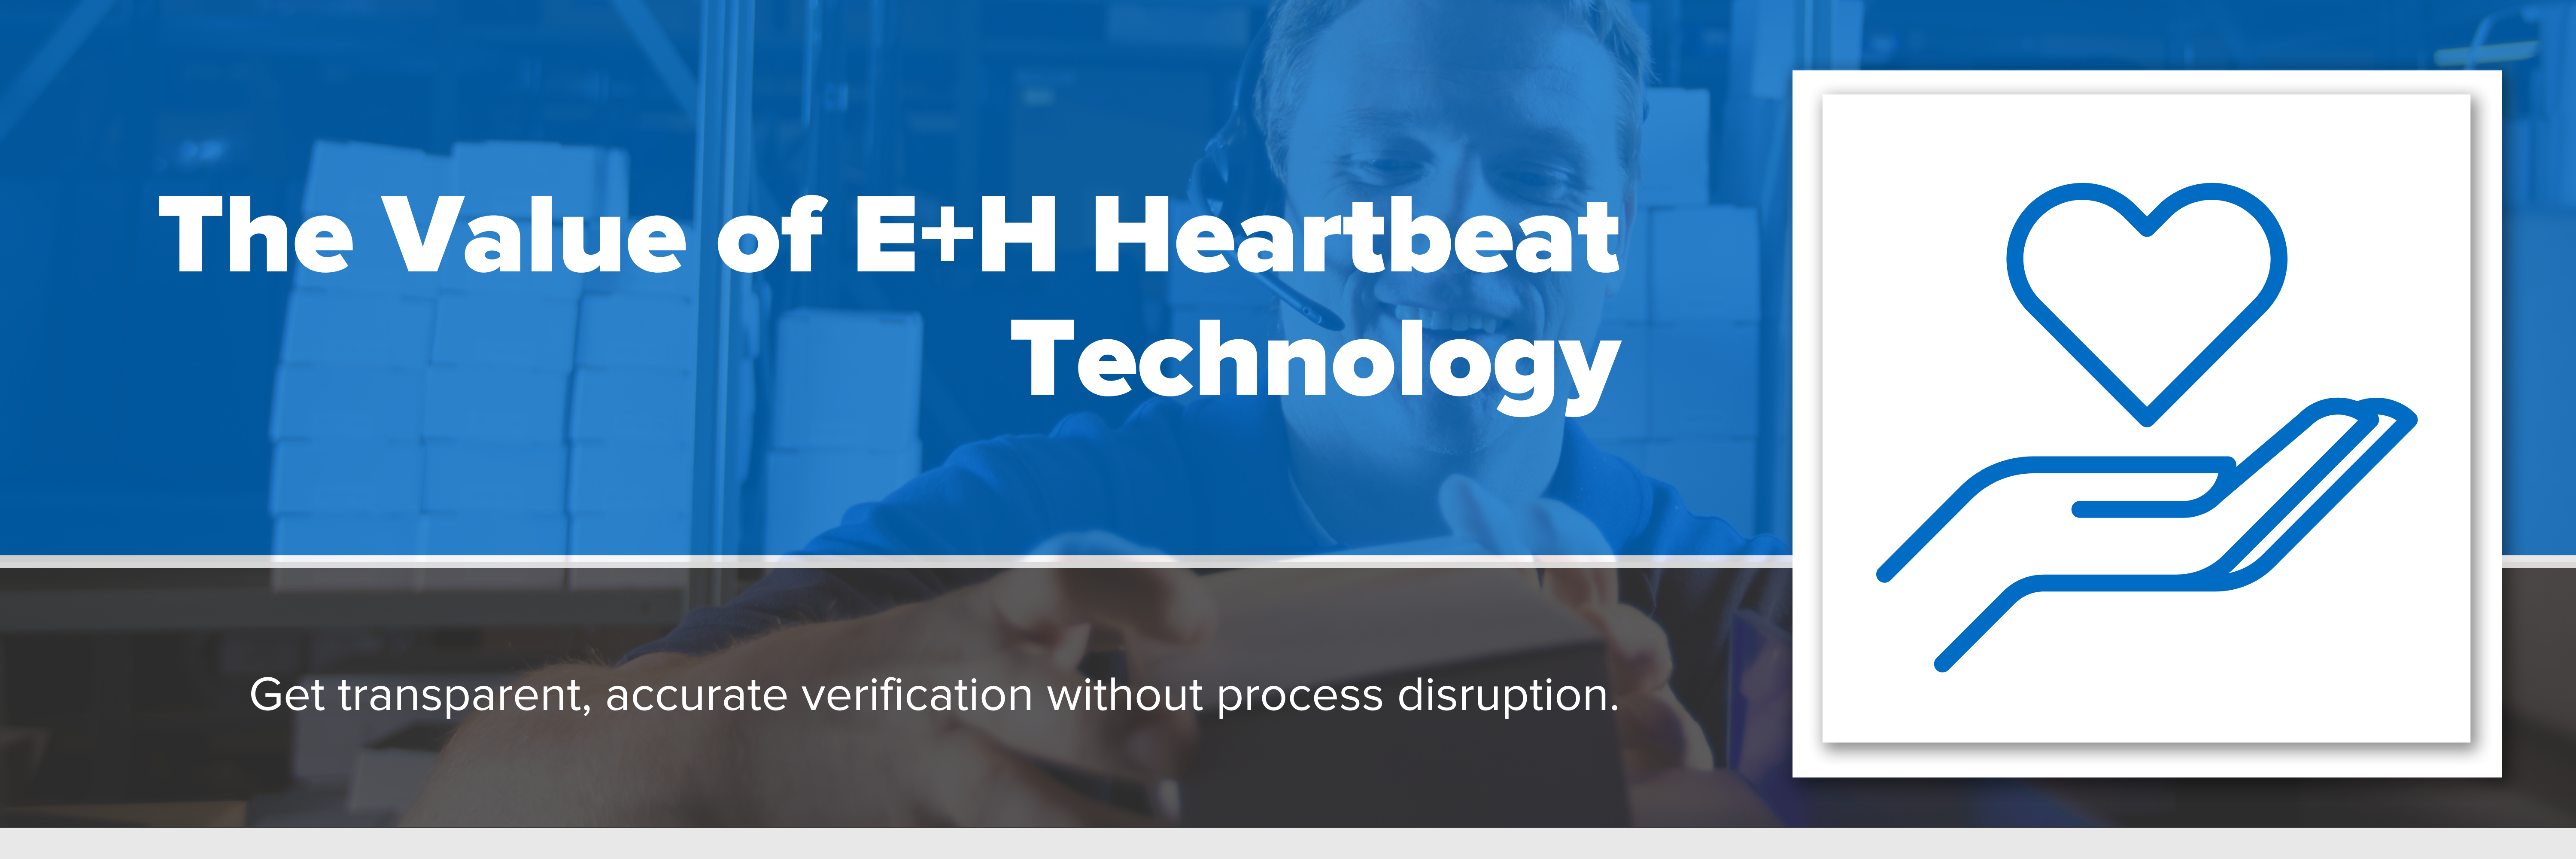 Header image with text "The Value of E+H Heartbeat Technology"